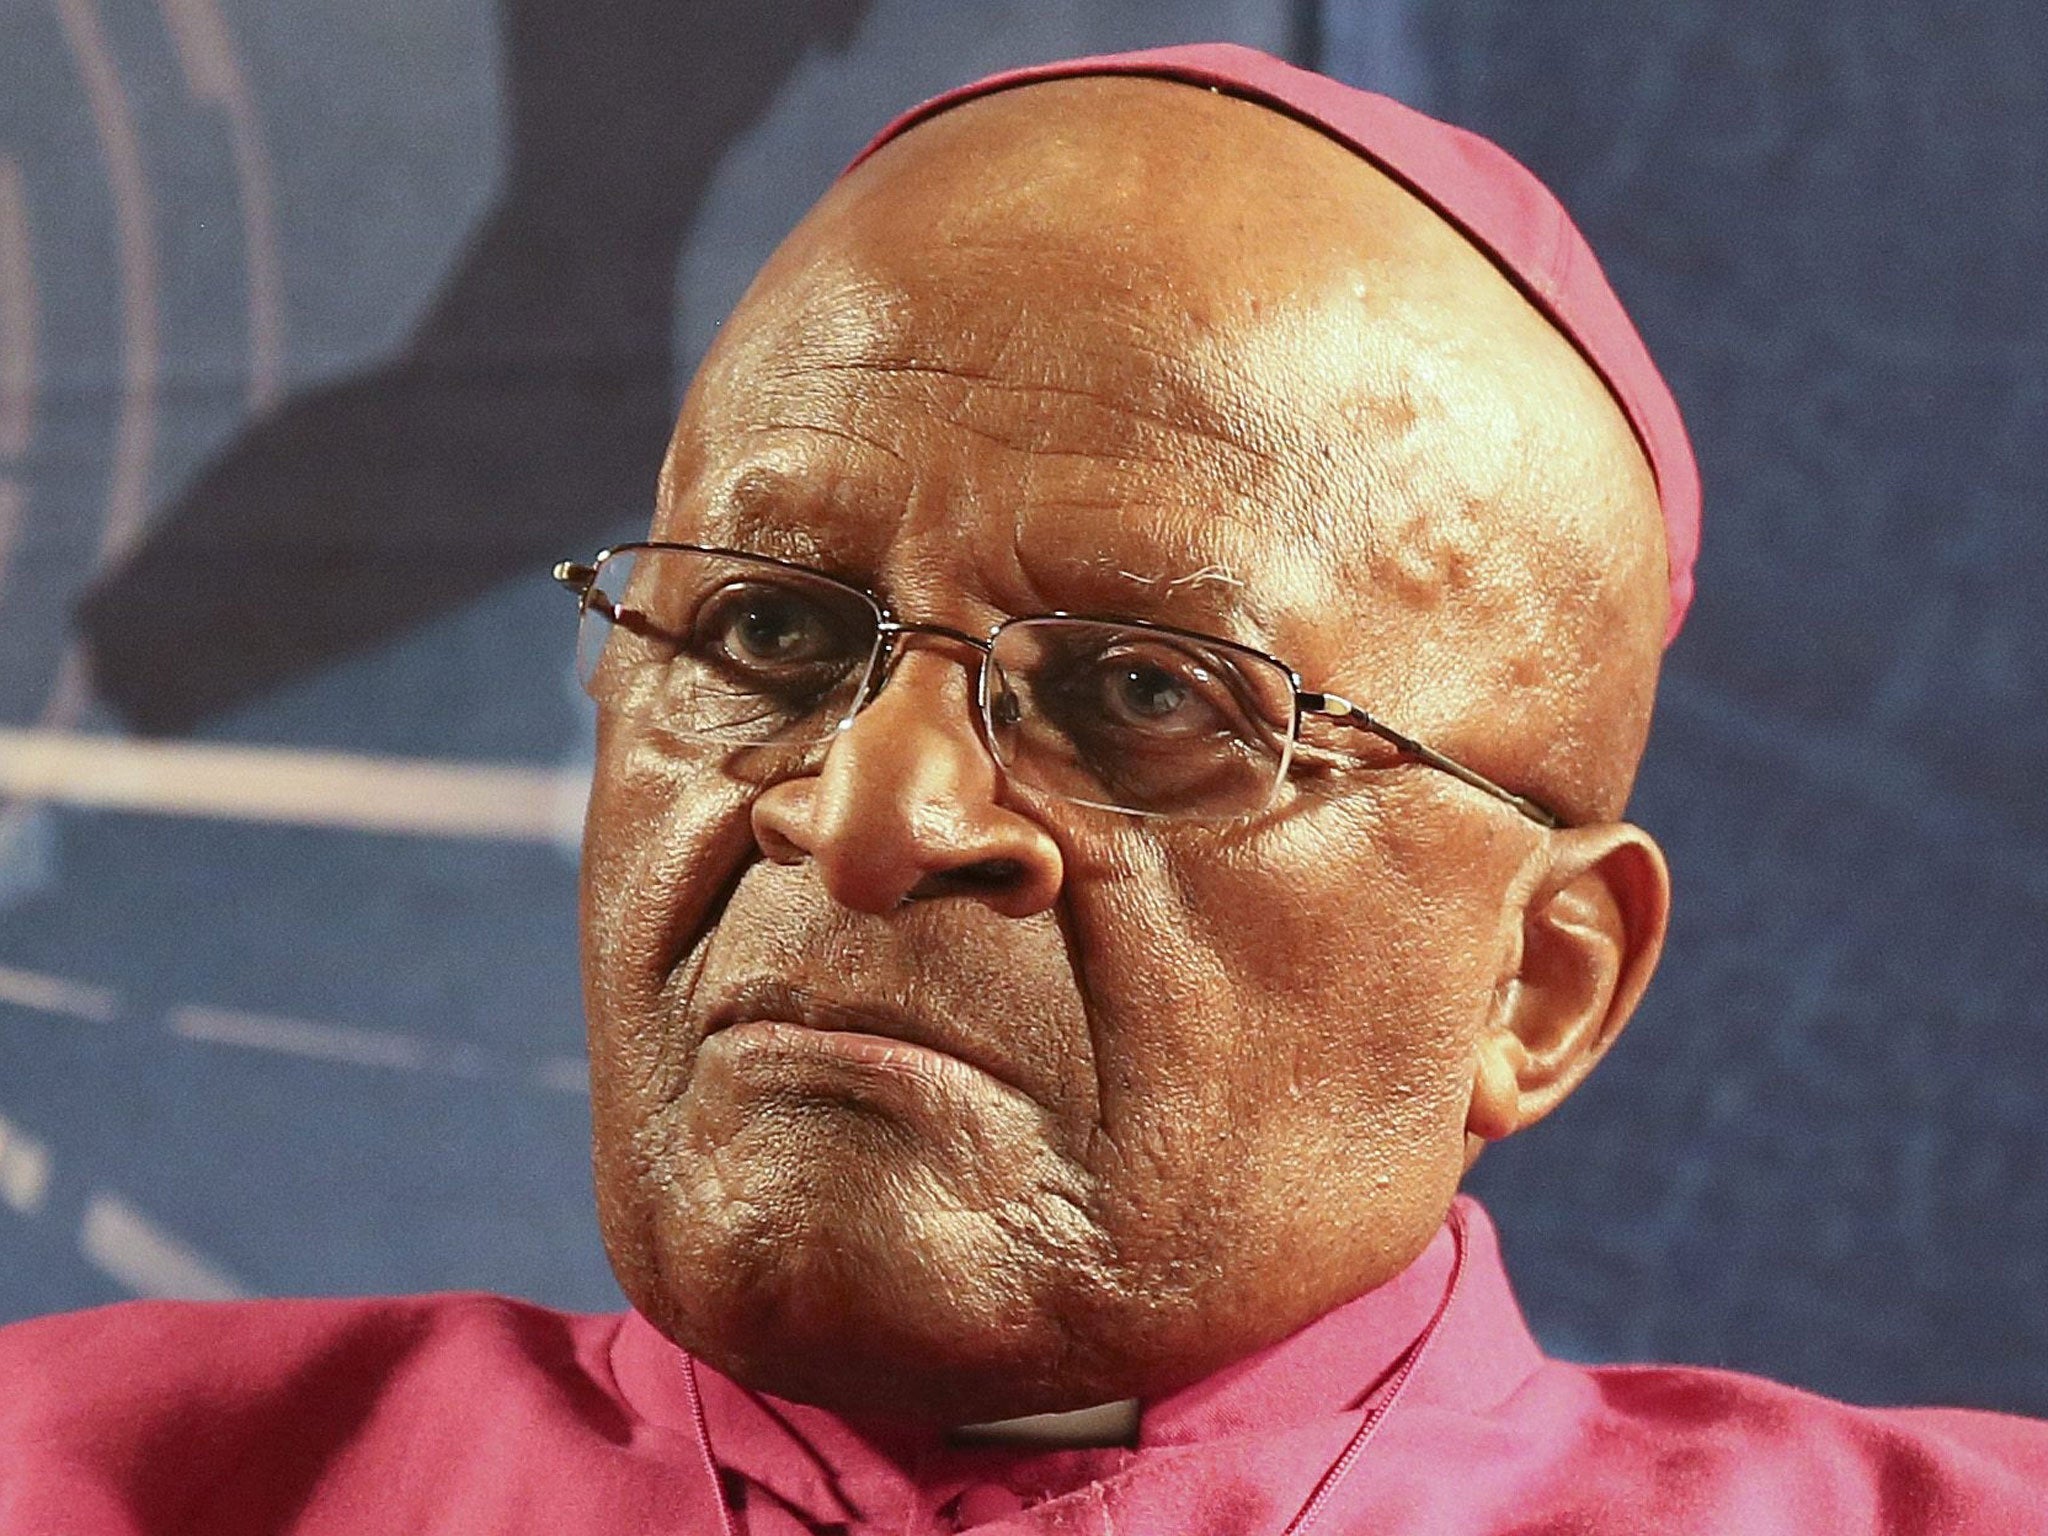 Desmond Tutu has said he will not attend Nelson Mandela's funeral.